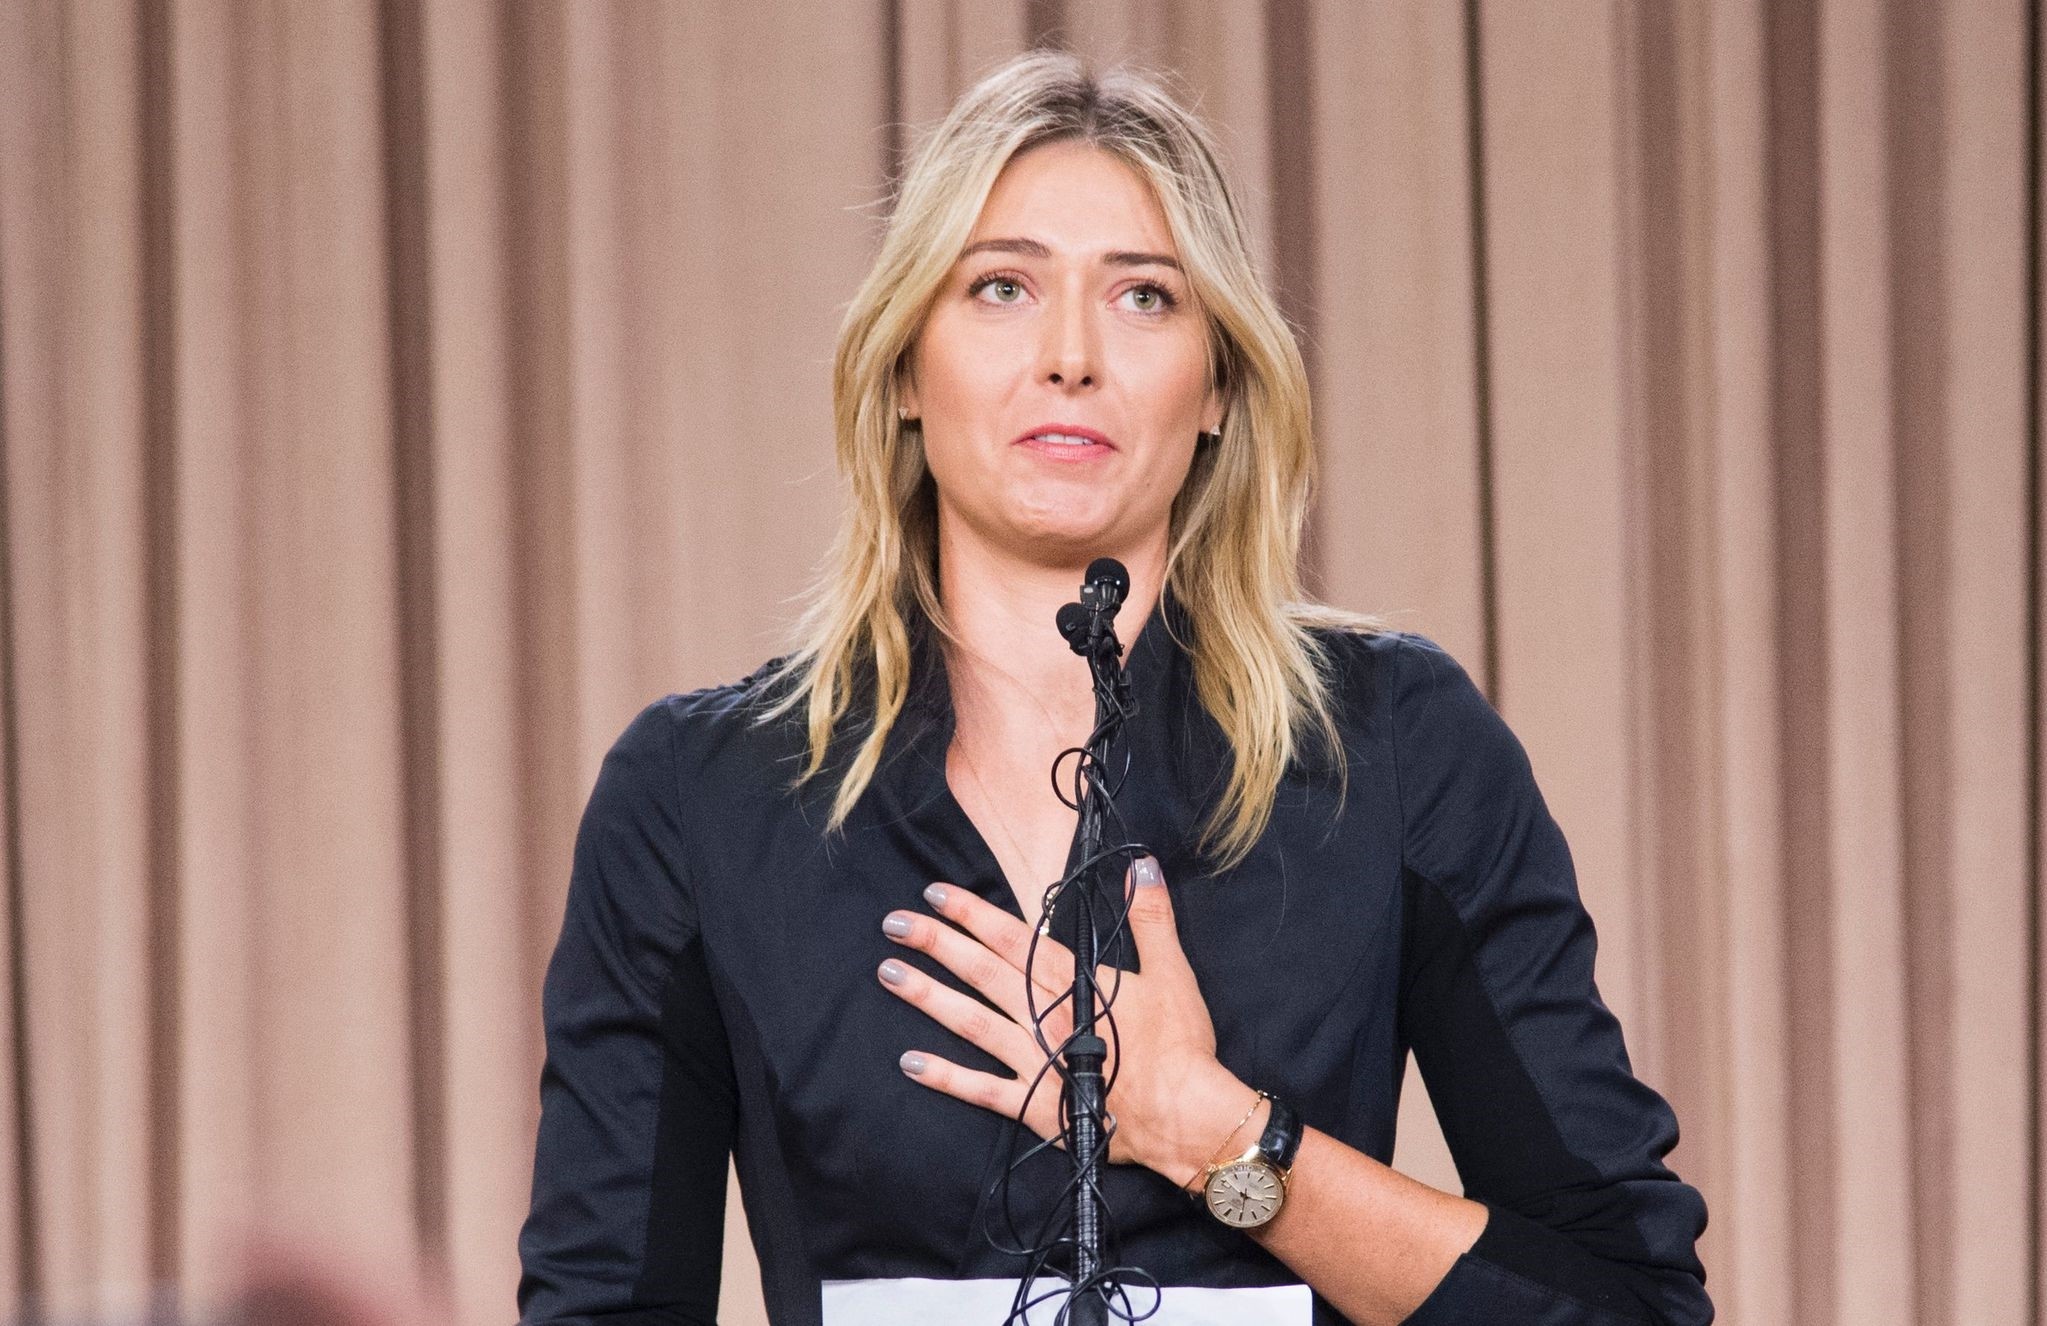 Russian tennis player Maria Sharapova speaking at a press conference in downtown Los Angeles, California, March 7, 2016. (AFP Photo)